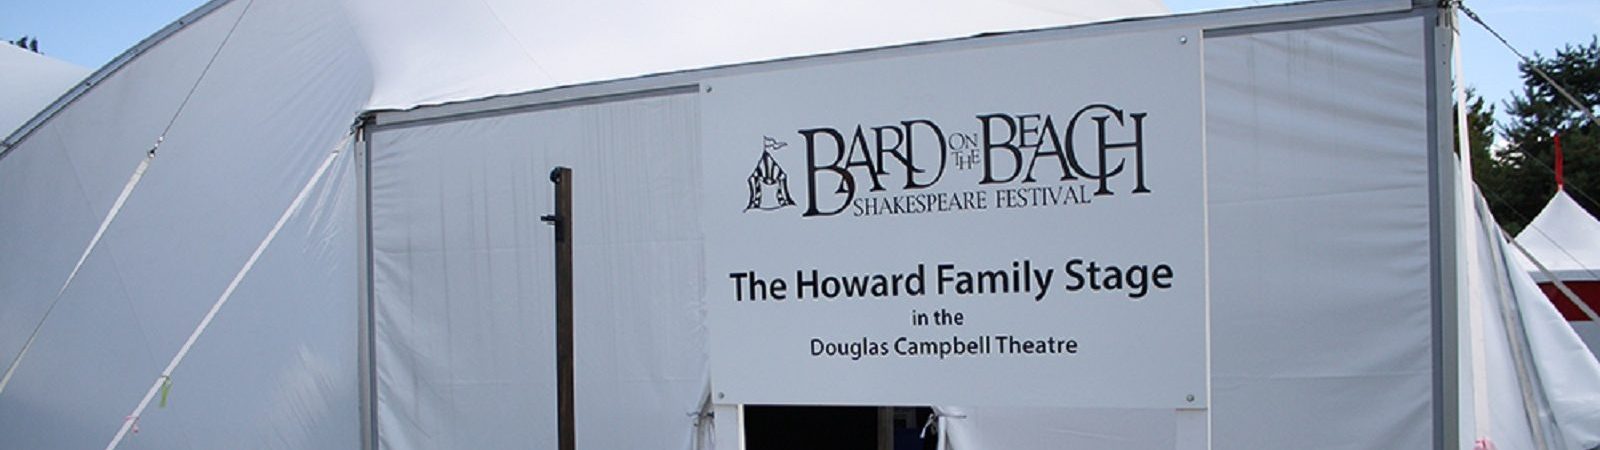 Howard Family Stage, Bard on the Beach